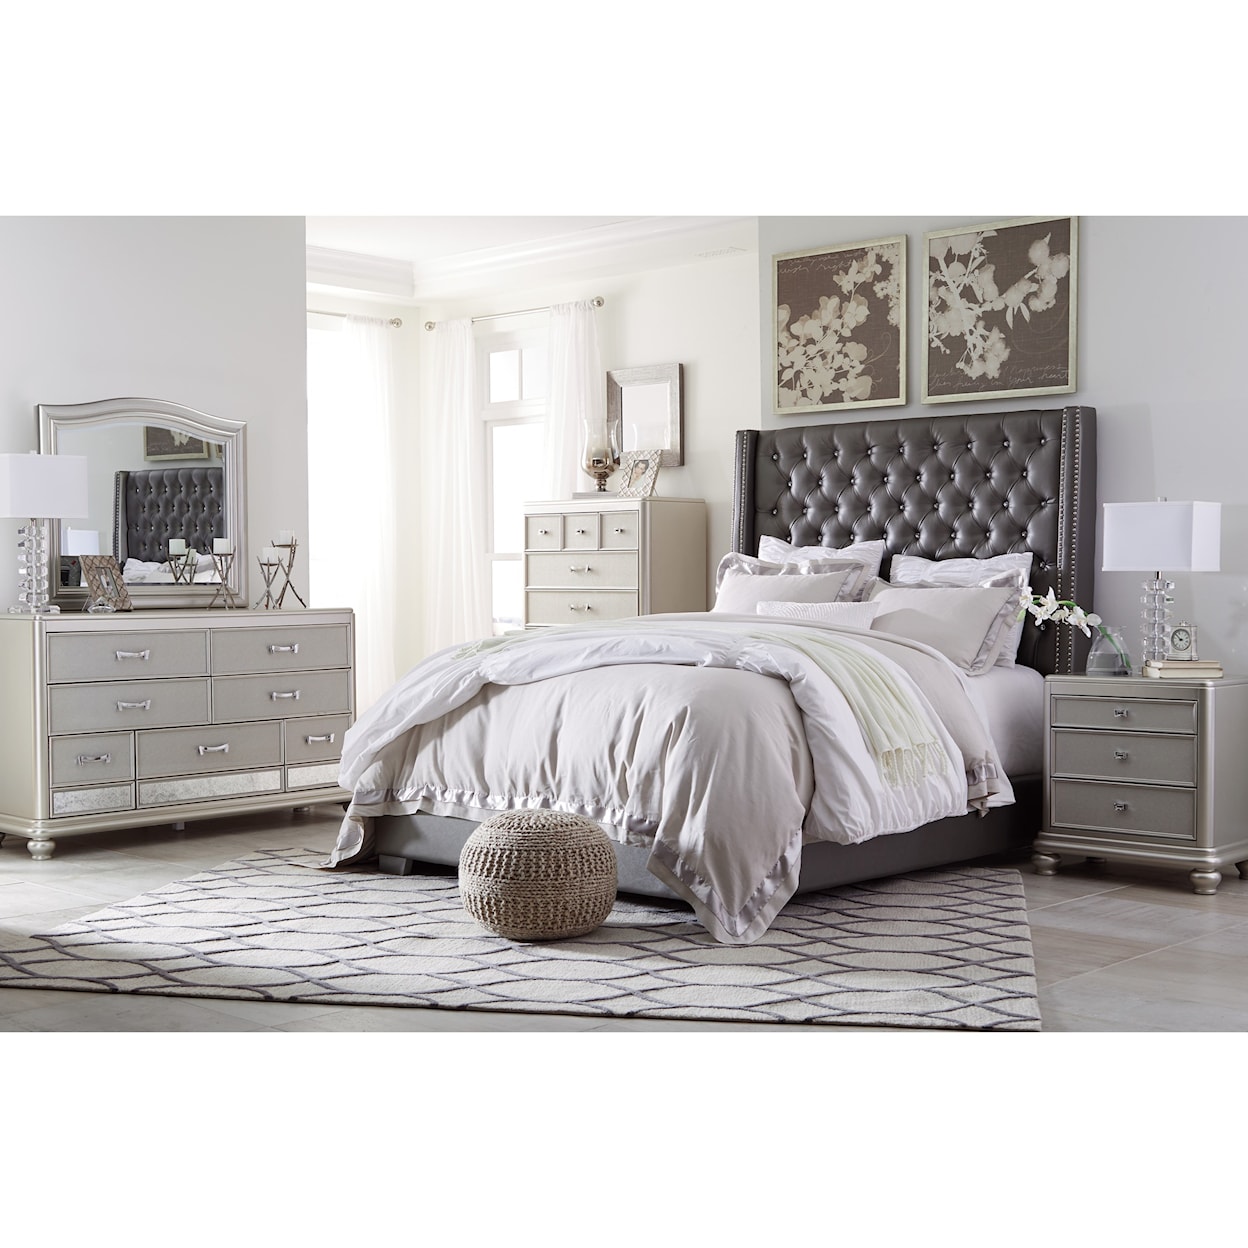 Signature Design by Ashley Coralayne California King Bedroom Group